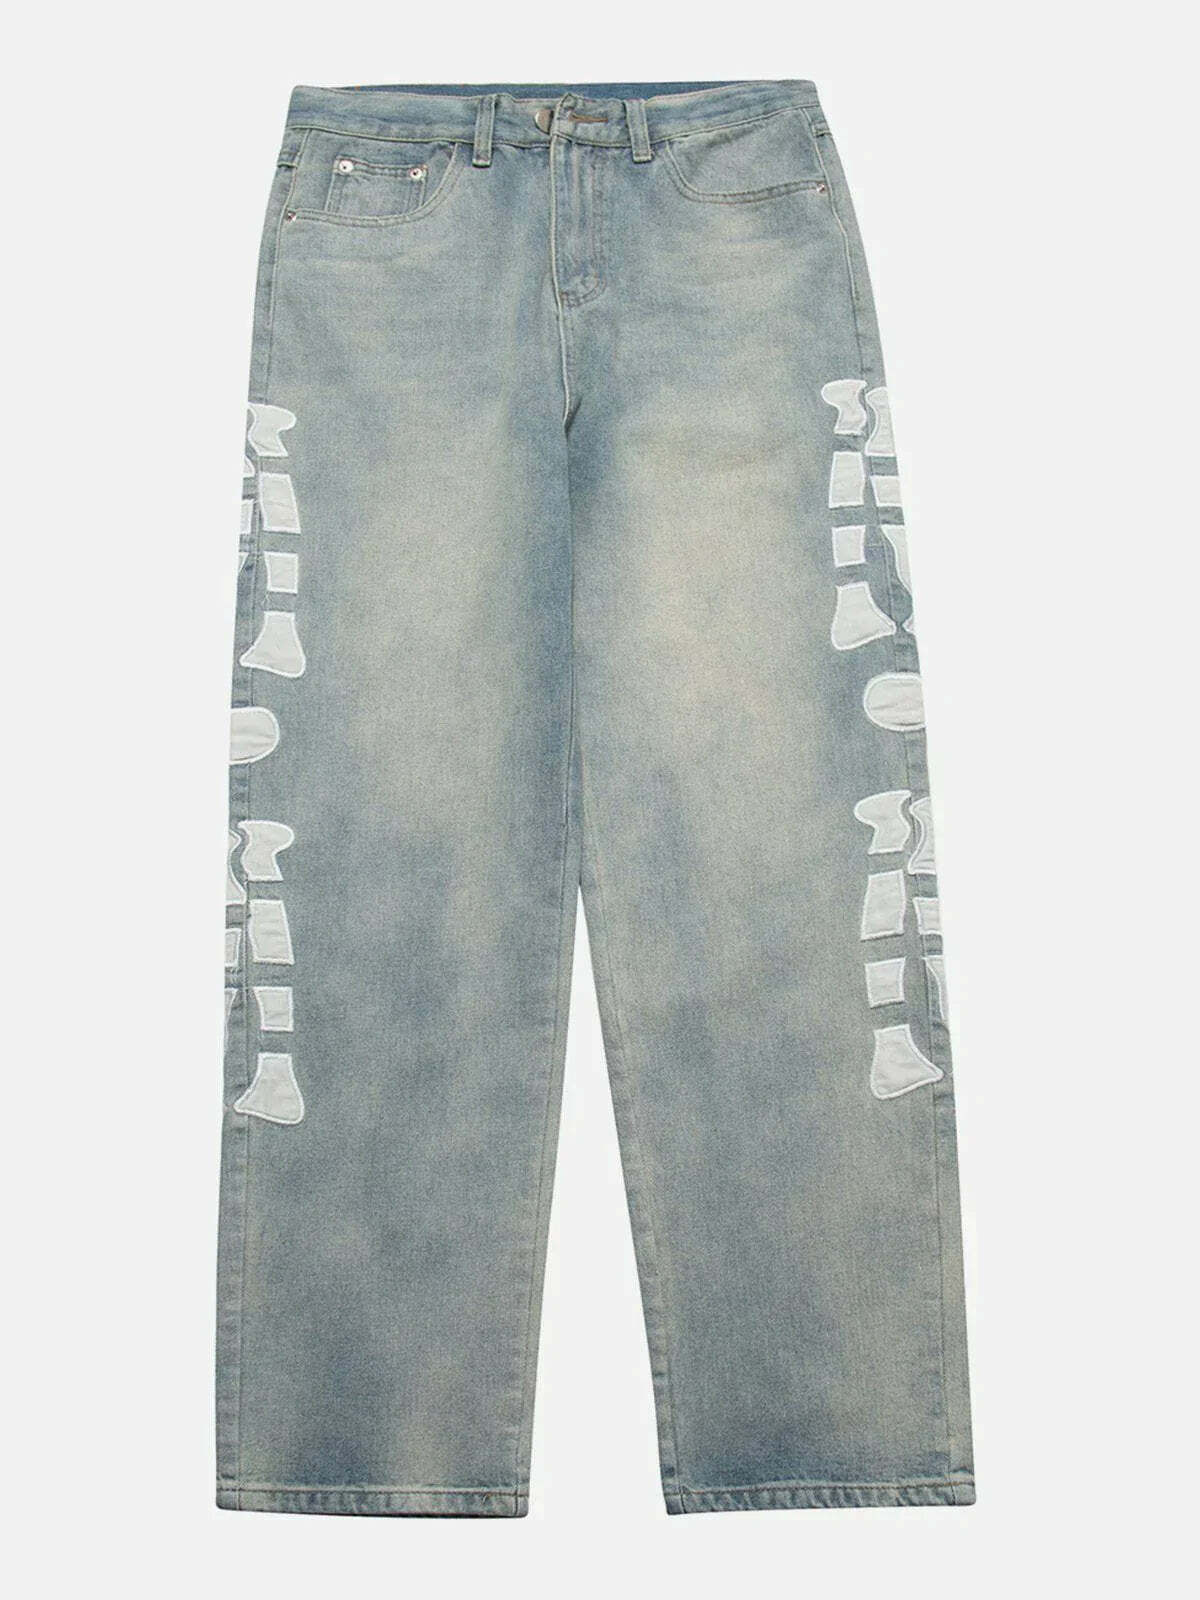 skull embroidered vintage jeans edgy & retro streetwear 7712